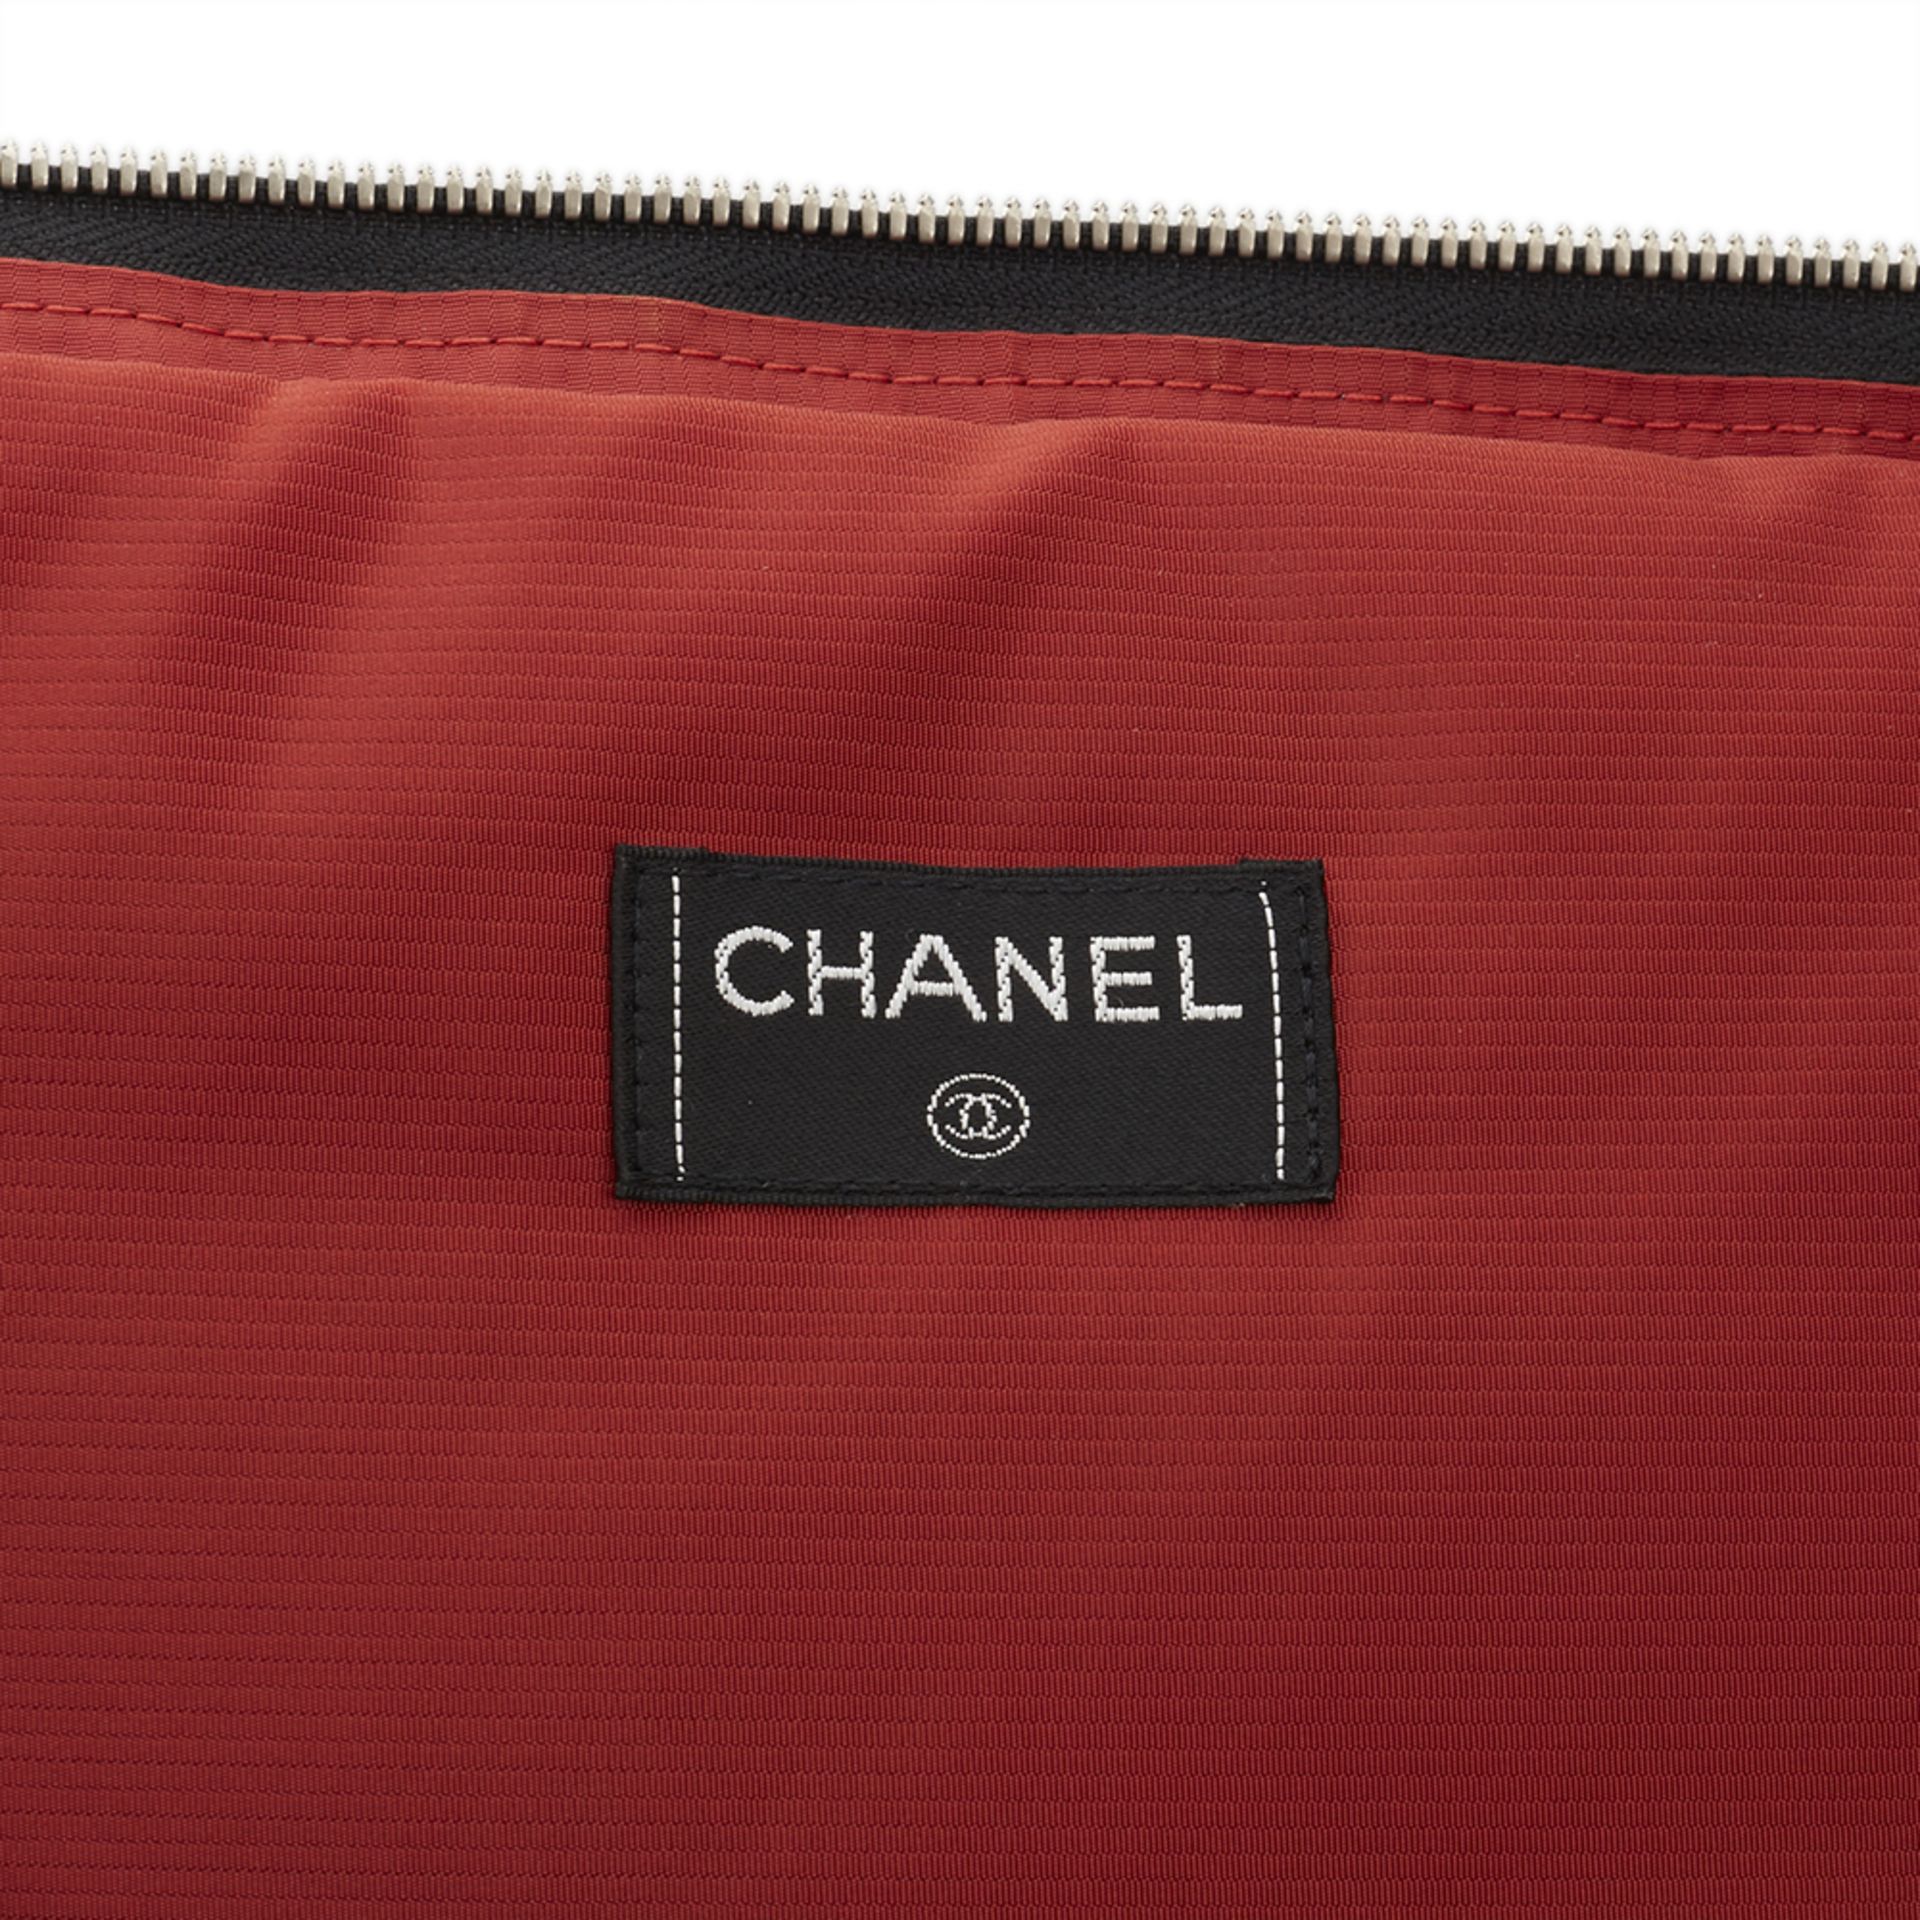 Chanel Rolling Case - Image 6 of 10